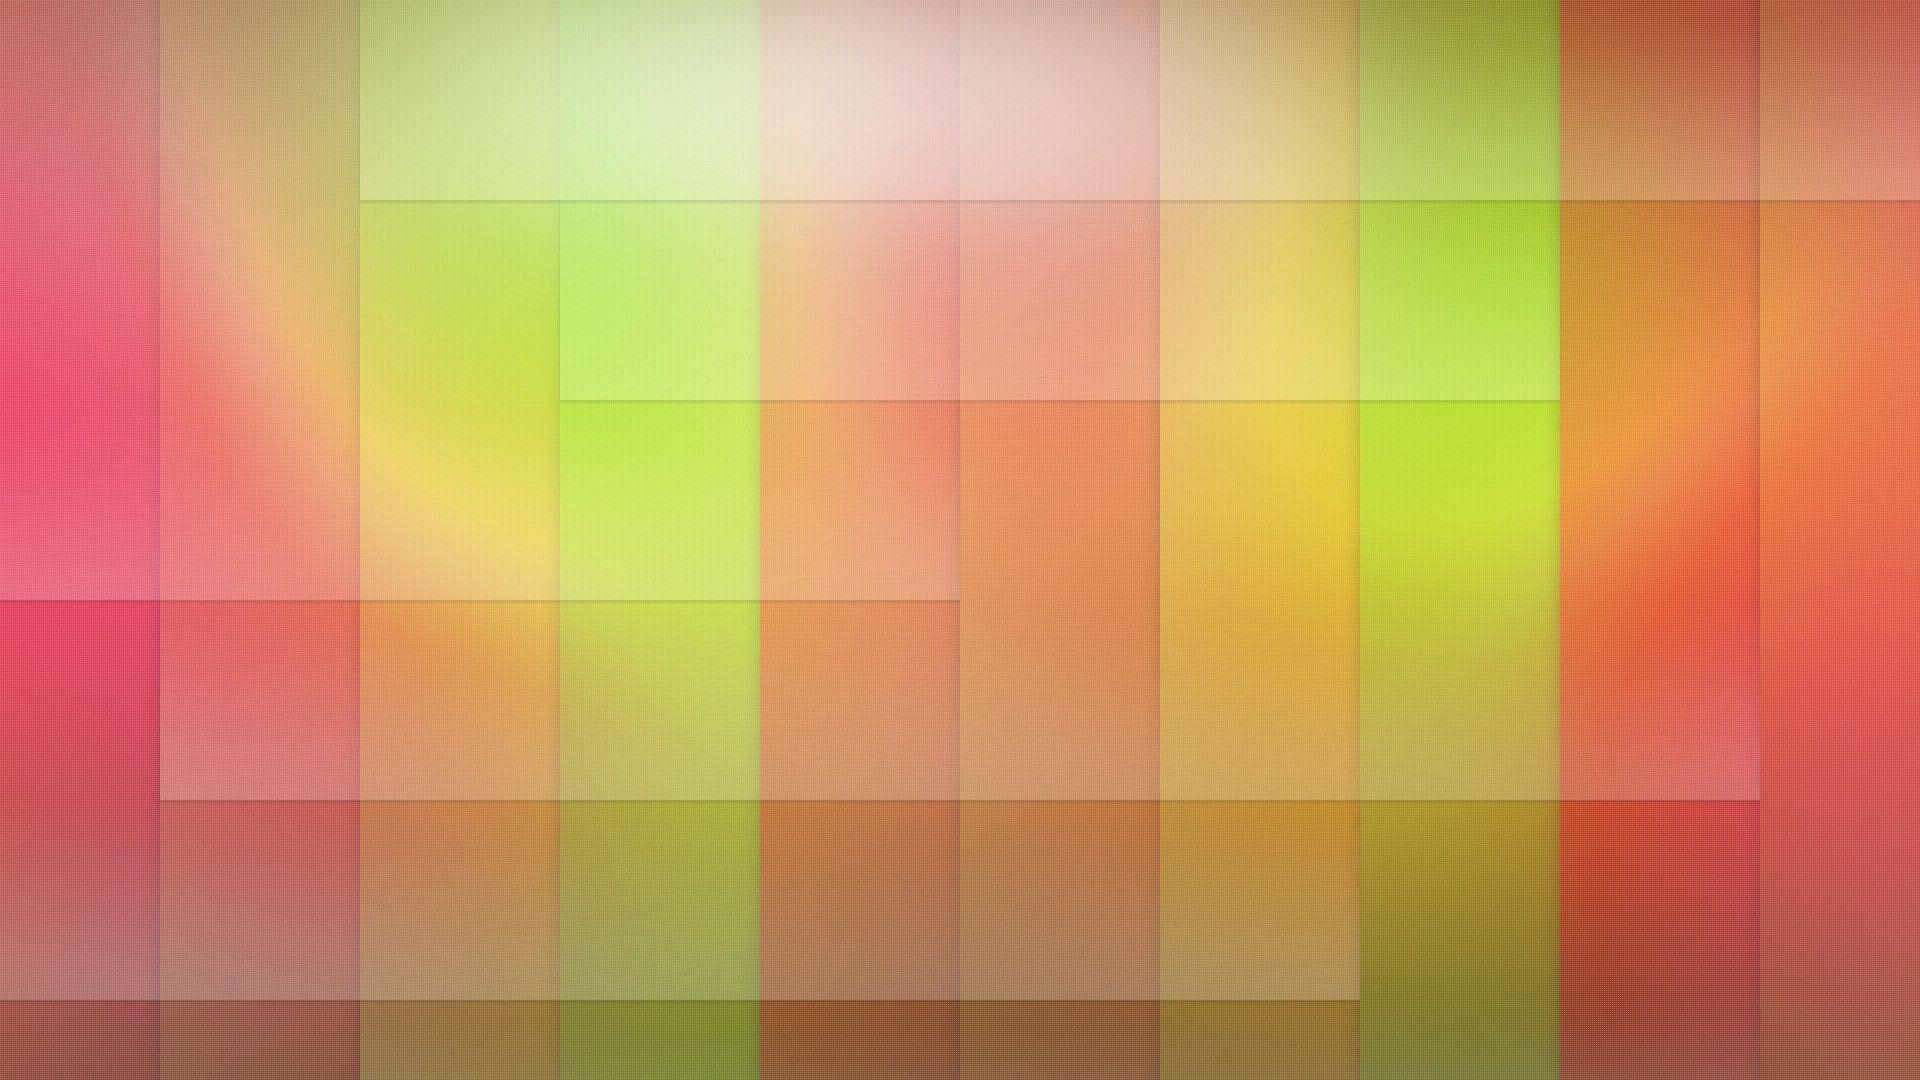 Hd 1920x1080 Abstract Color Grids Desktop Wallpaper Background